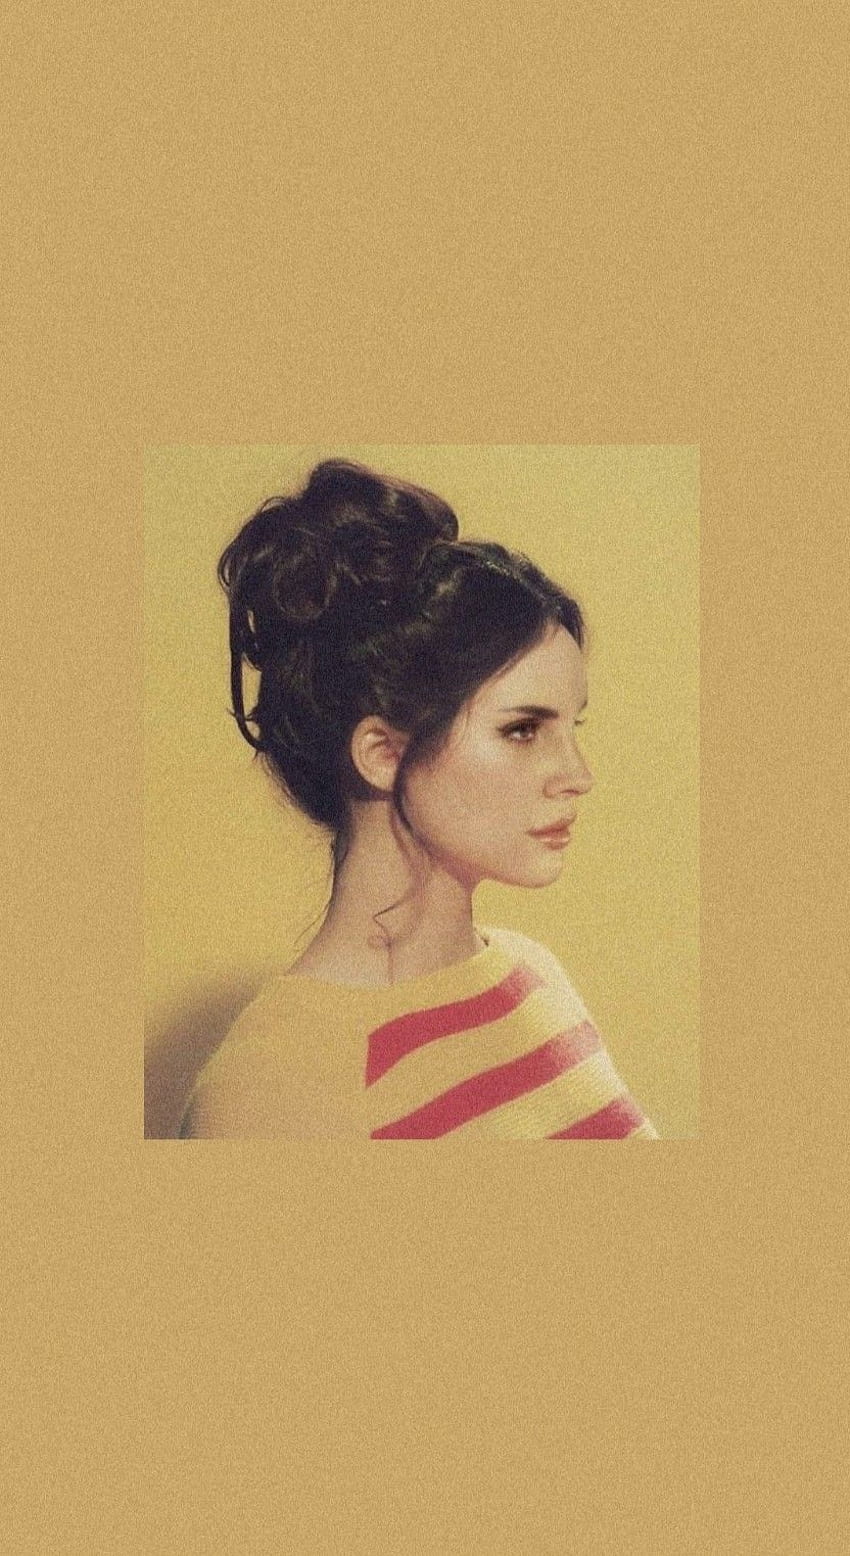 IPhone wallpaper of a woman with dark hair in a bun and wearing a red and white striped shirt - Lana Del Rey